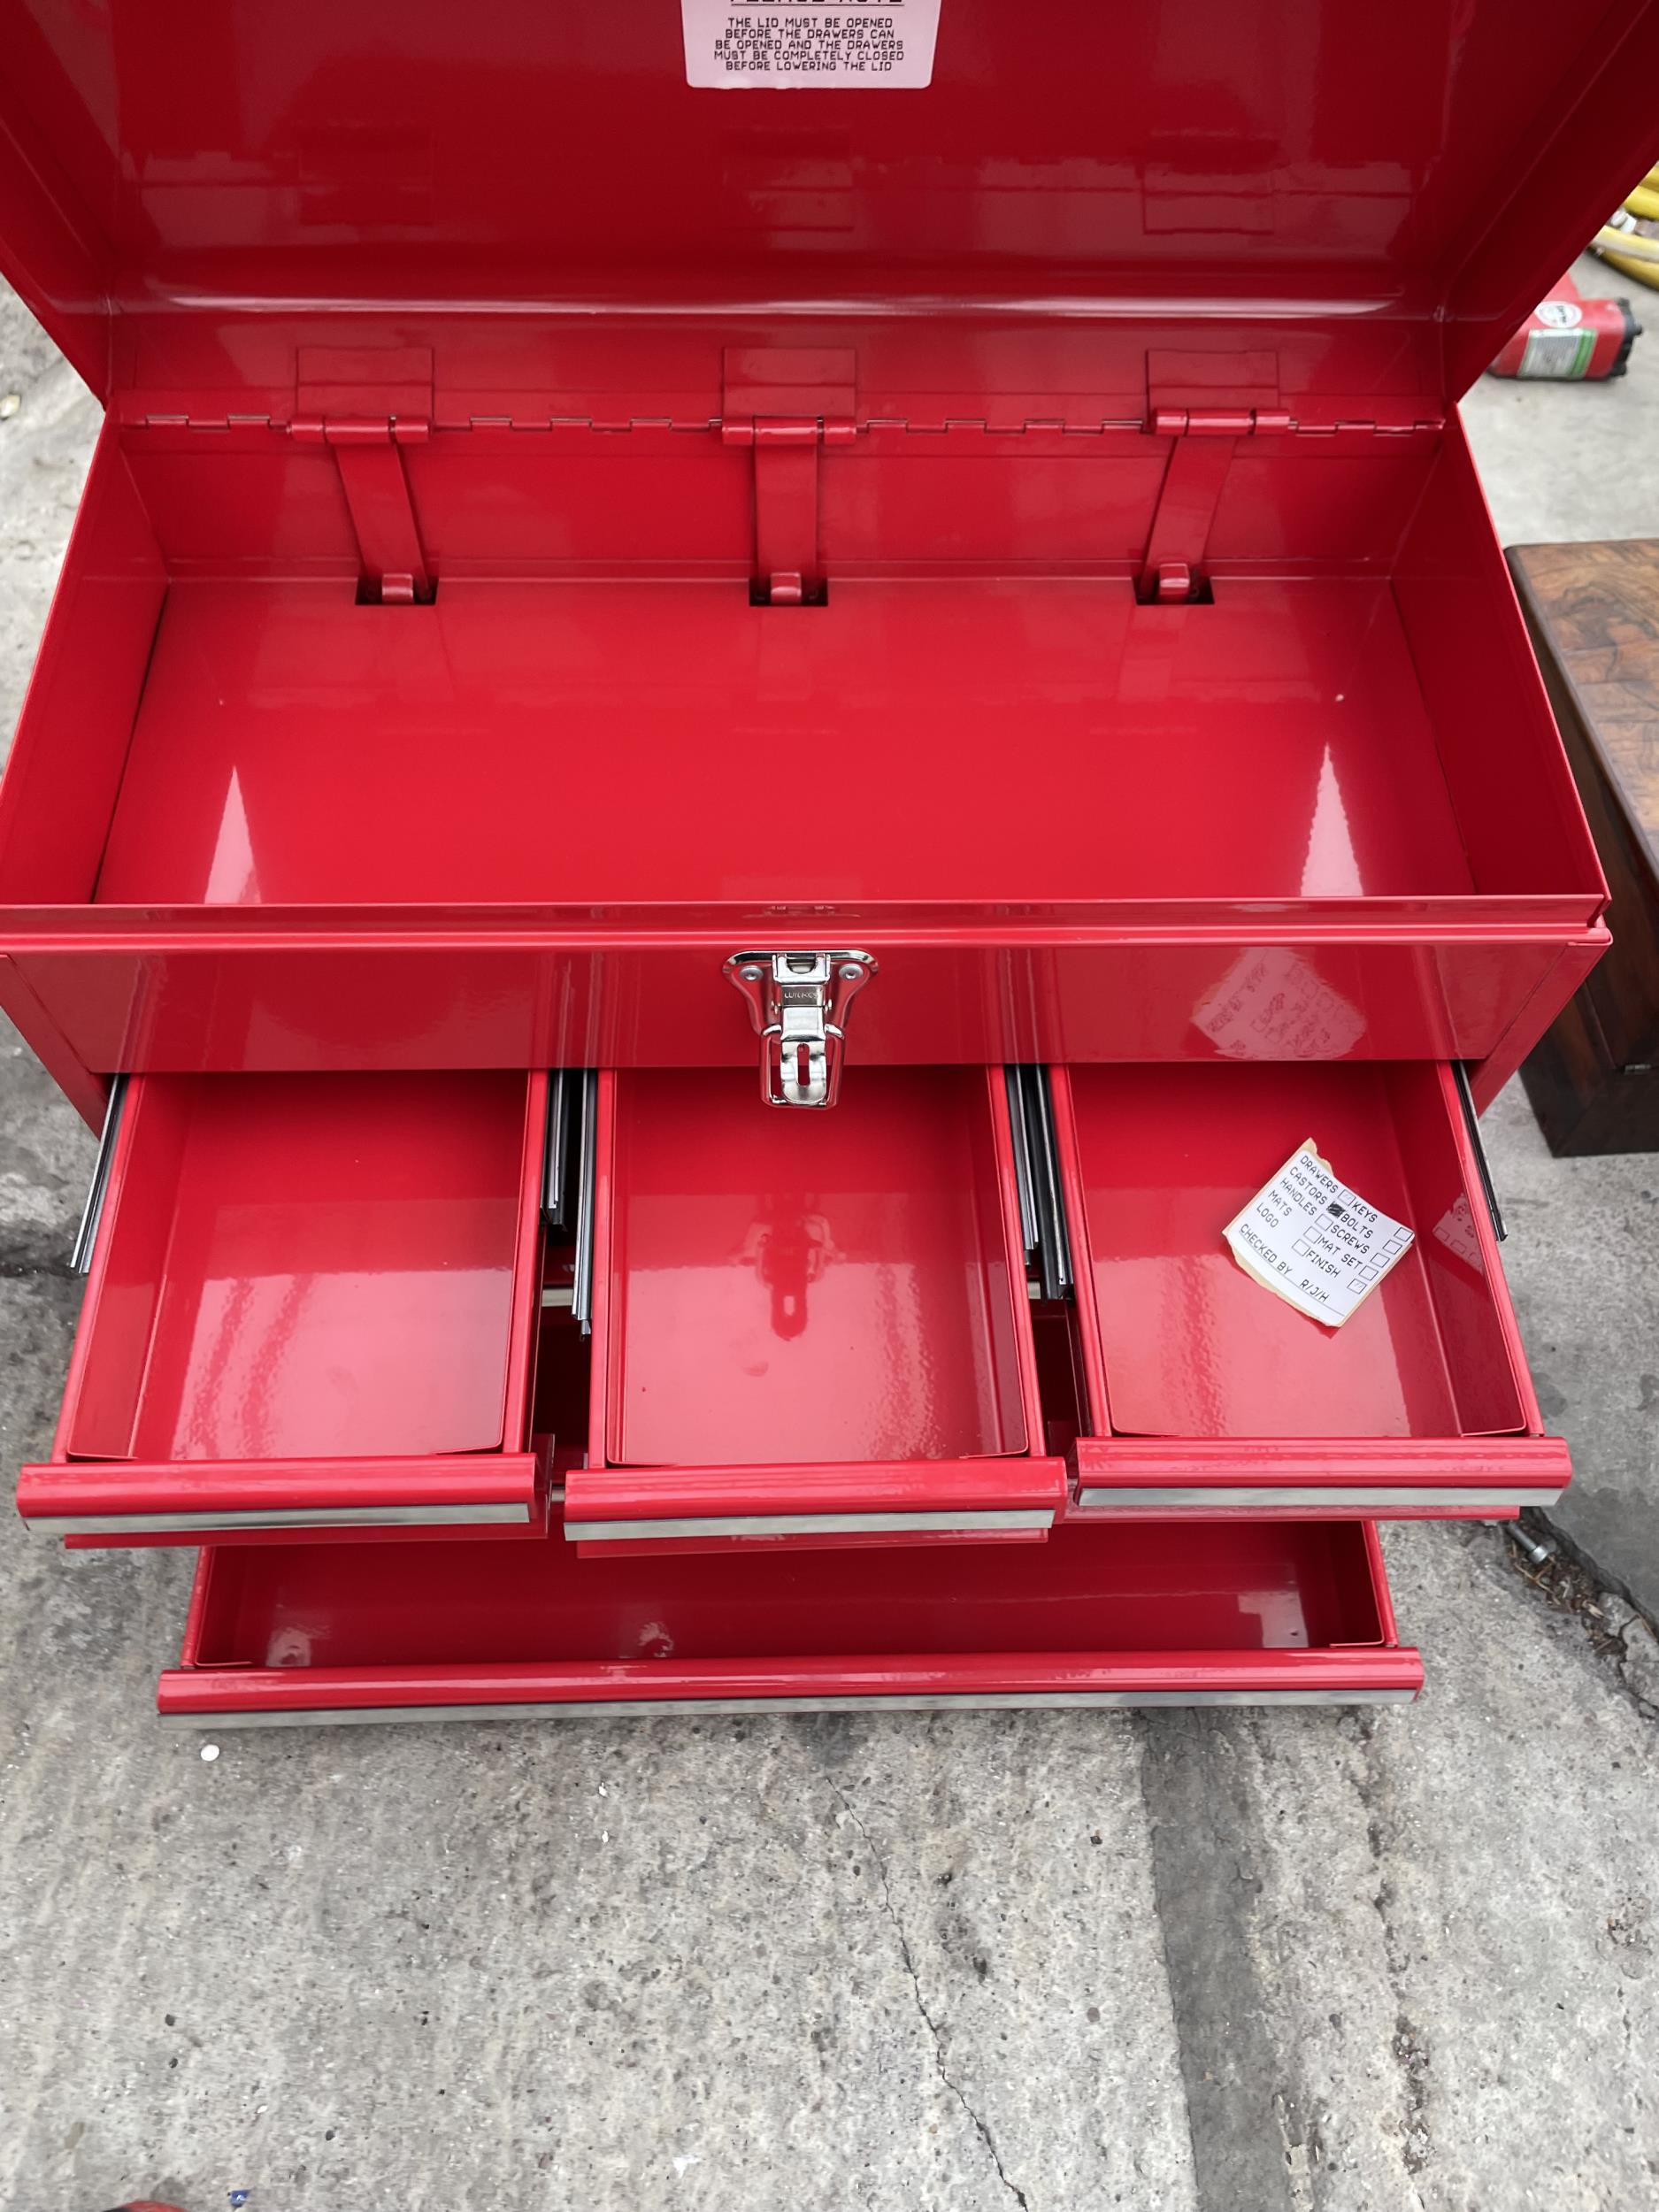 A RED METAL WORKSHOP TOOL BOX WITH SIX DRAWERS AND A TOP STORAGE COMPARTMENT - Image 4 of 4